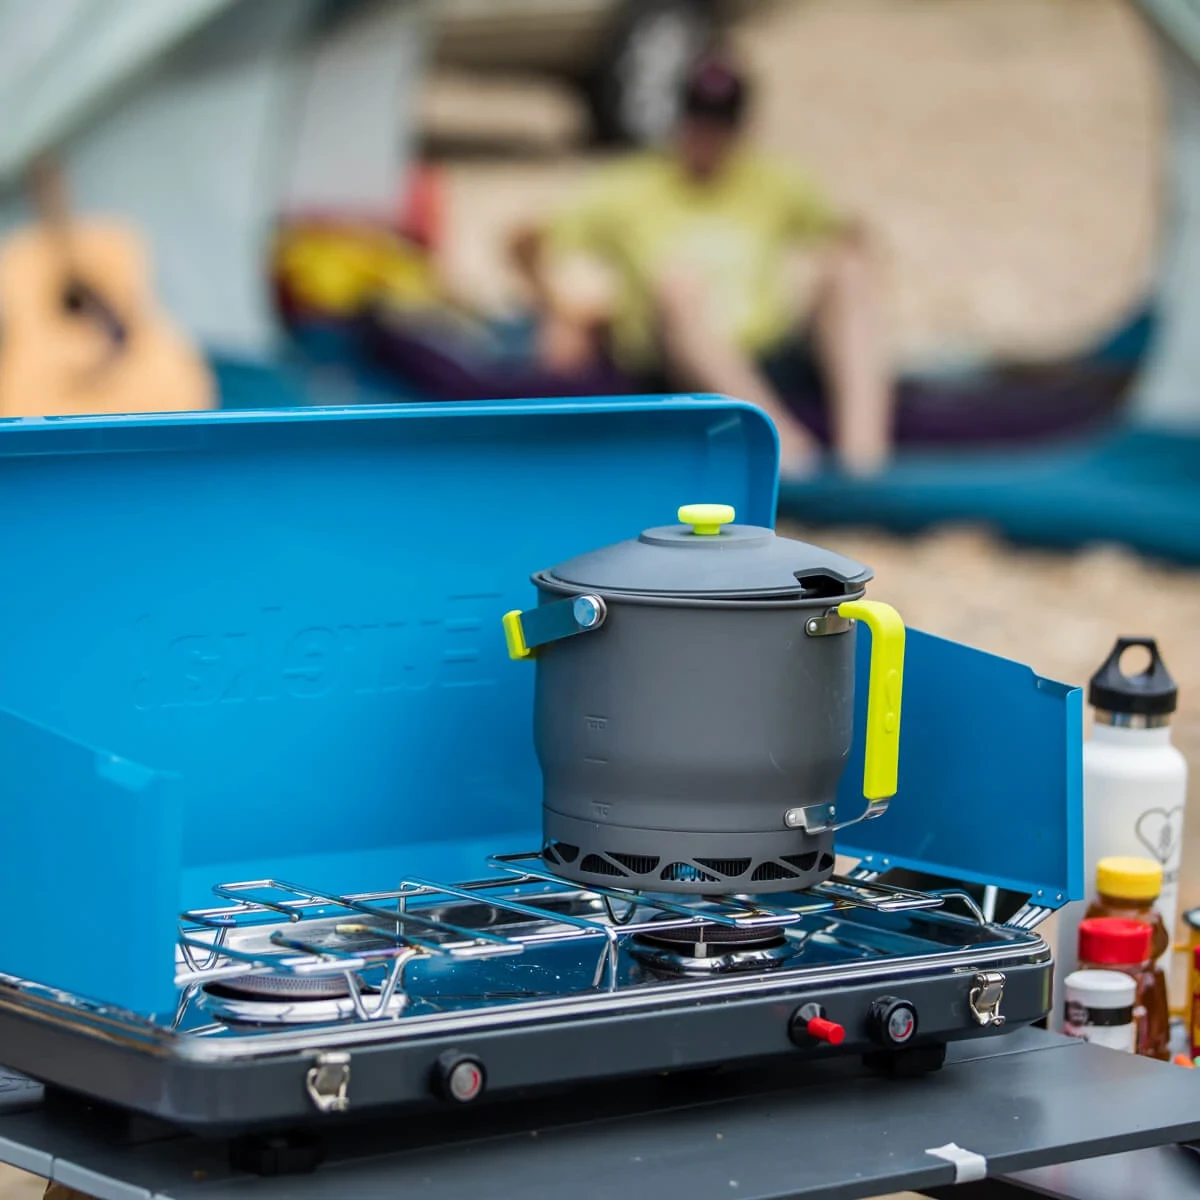 The Ignite Plus Camp Stove and Camp Cafe